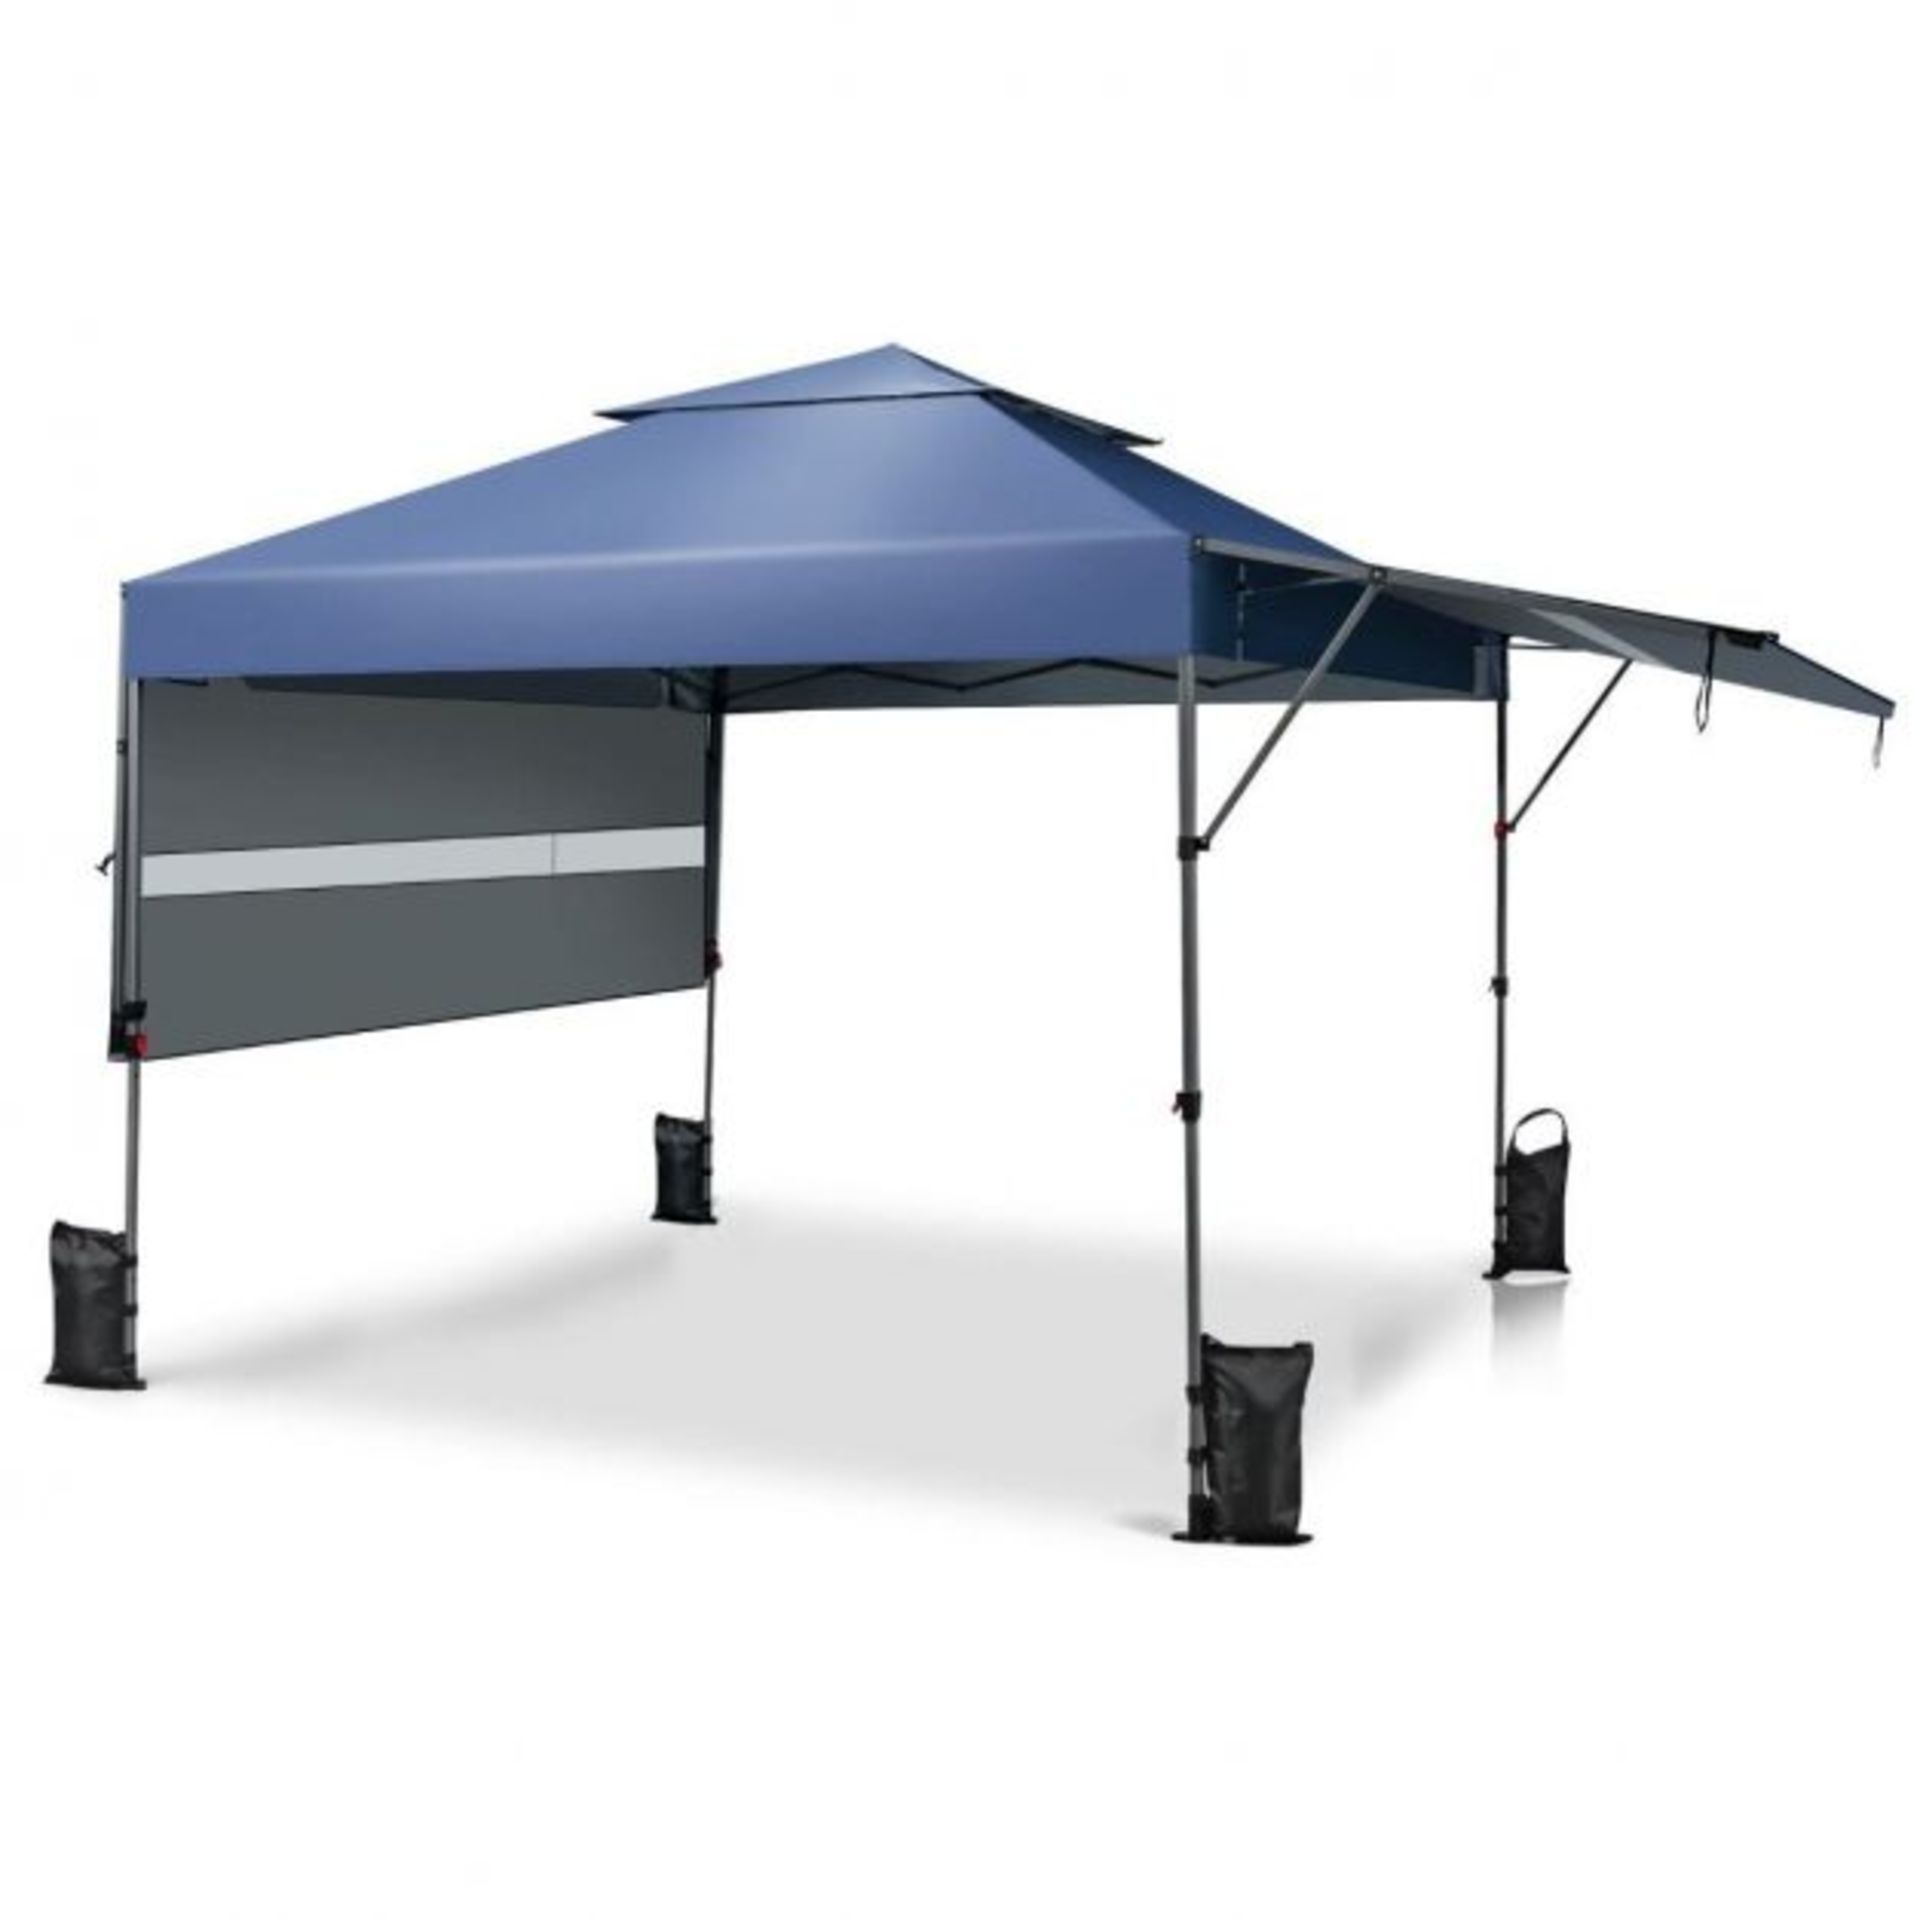 3 x 3m Rolling Pop up Gazebo with Adjustable Dual Awnings and Height